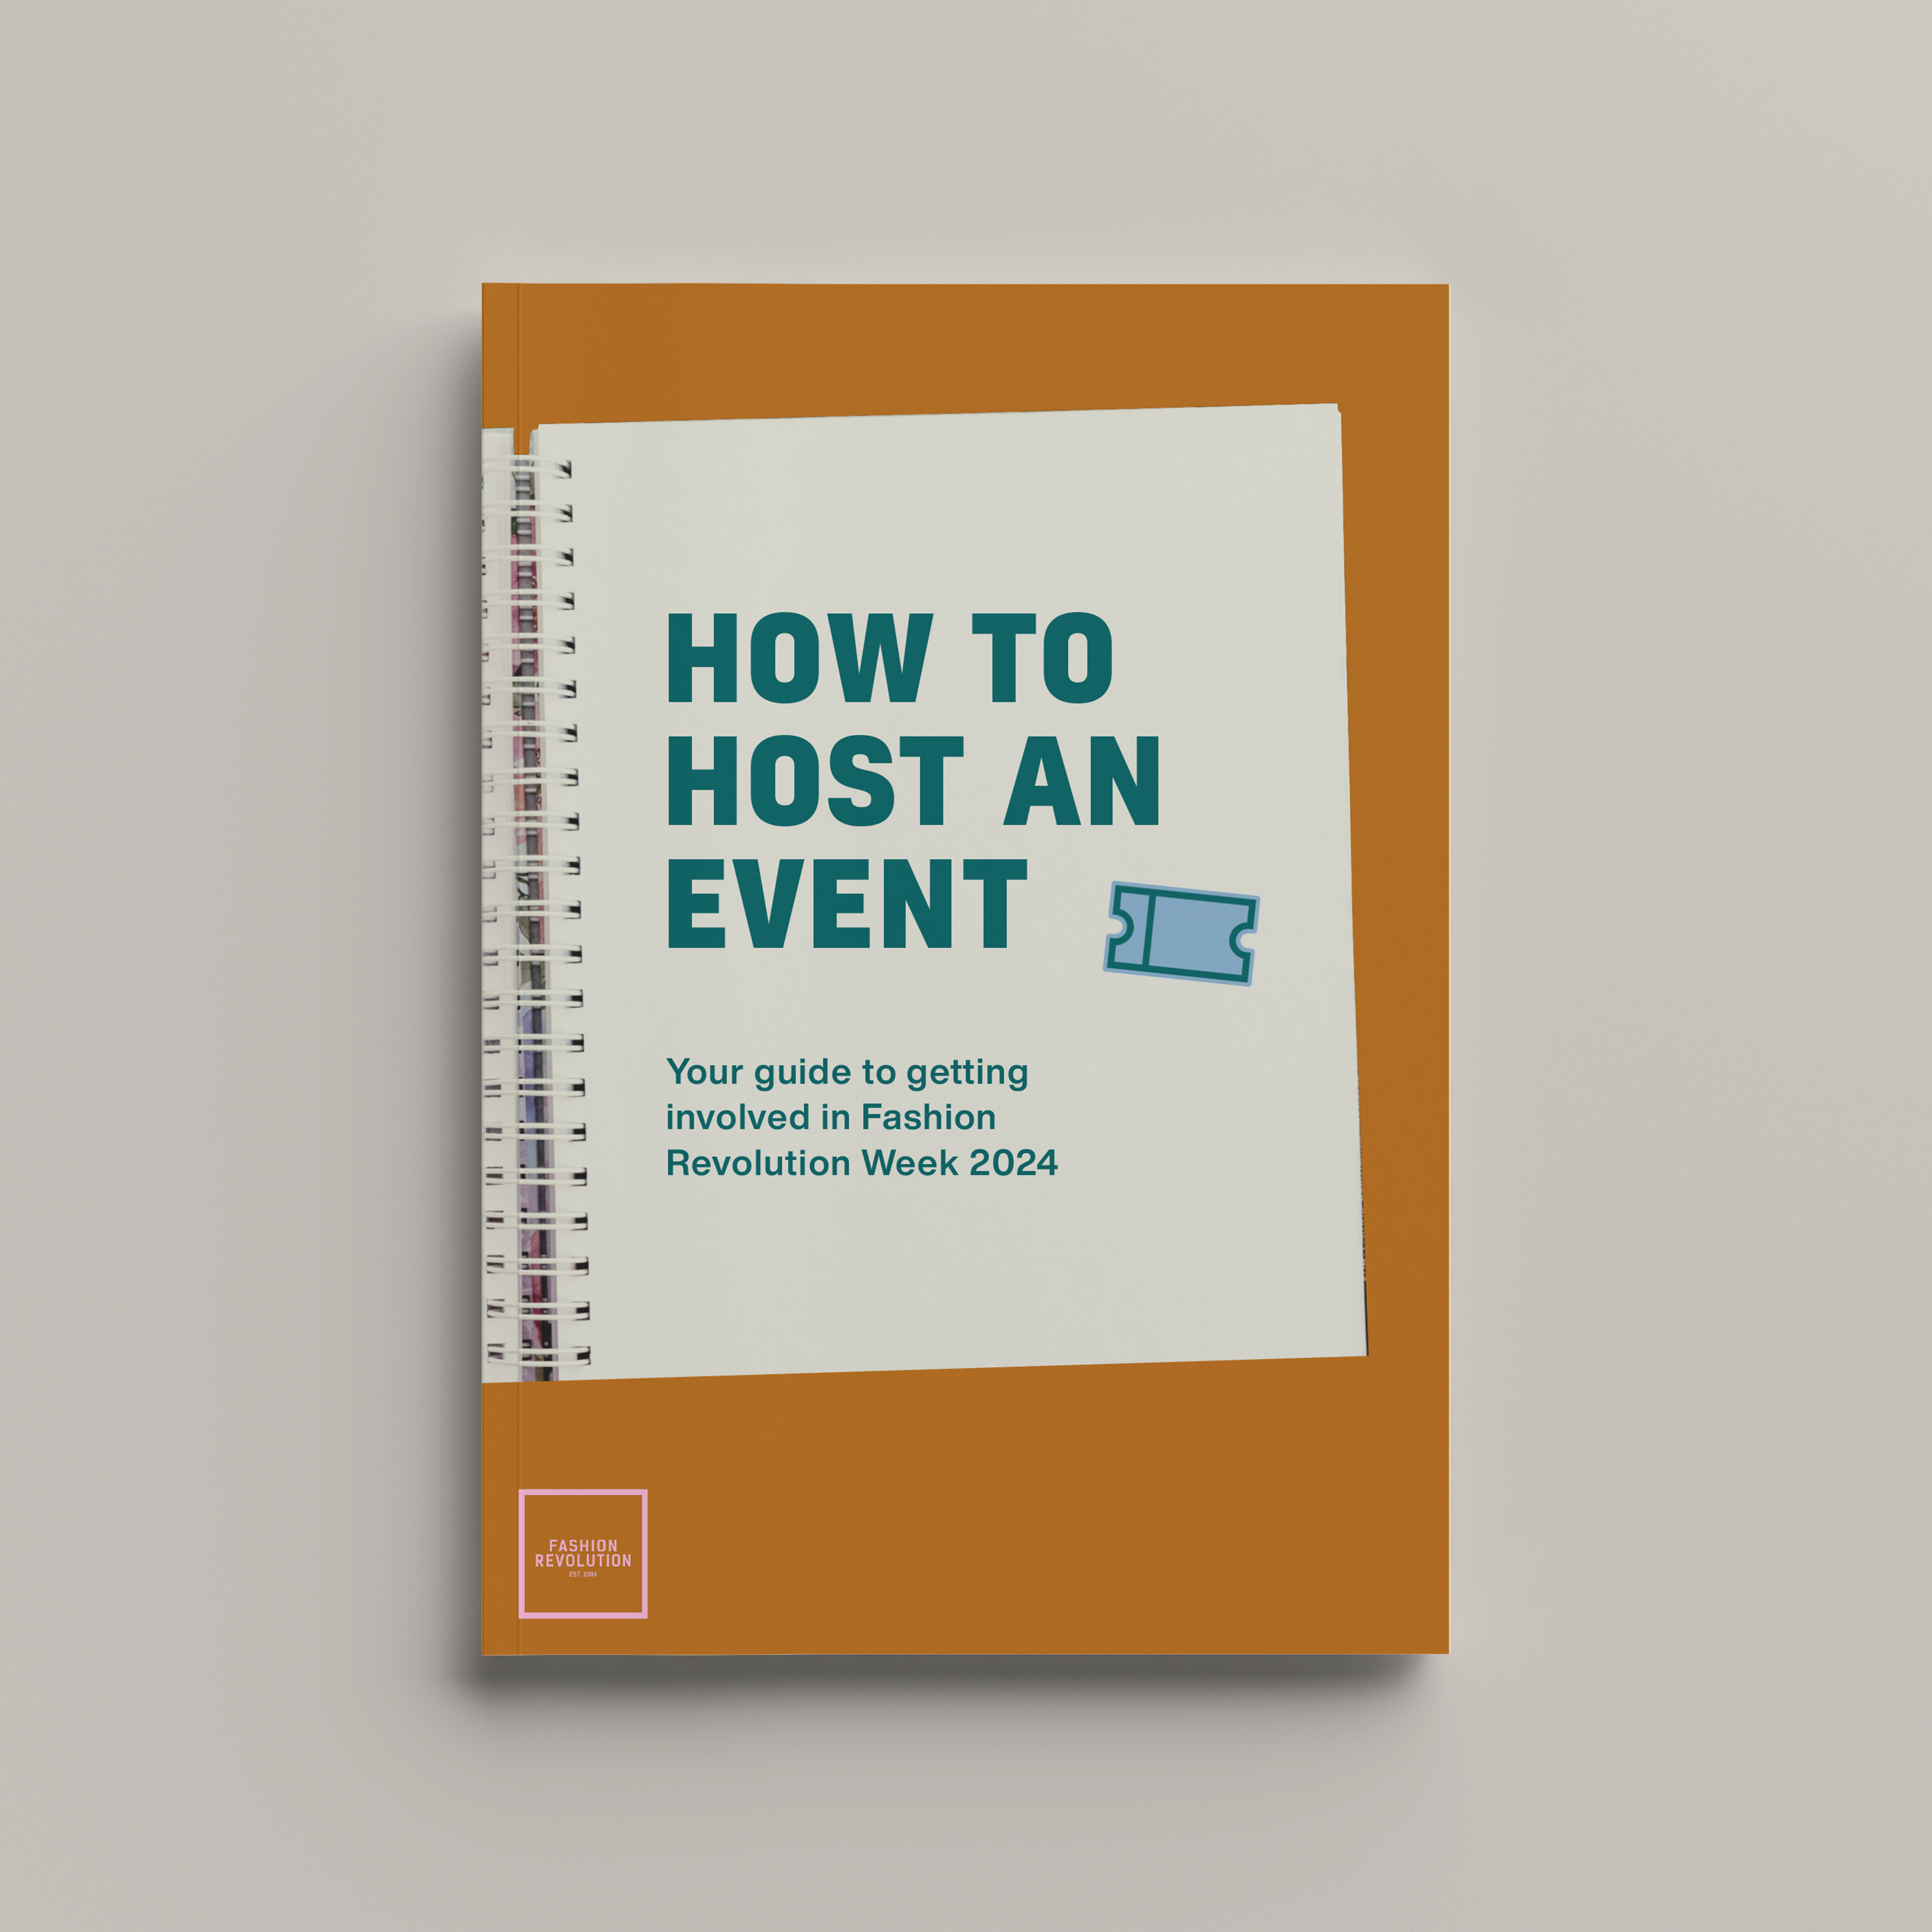 Host an Event: How to Guide